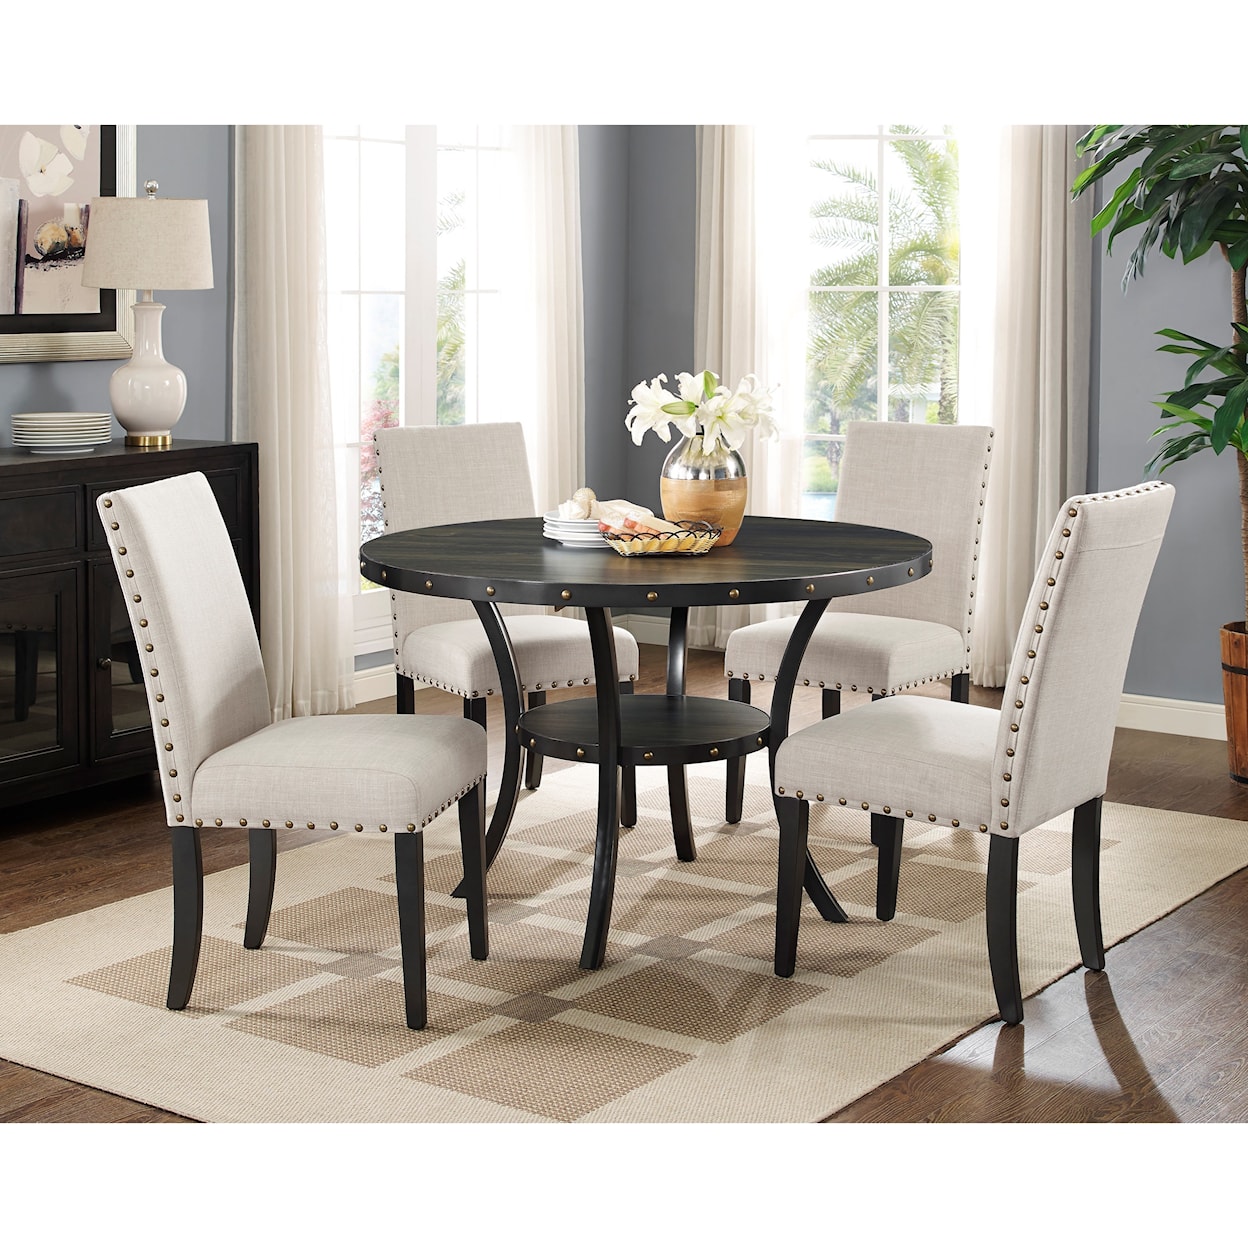 New Classic Furniture Crispin 5-Piece Table and Chair Set